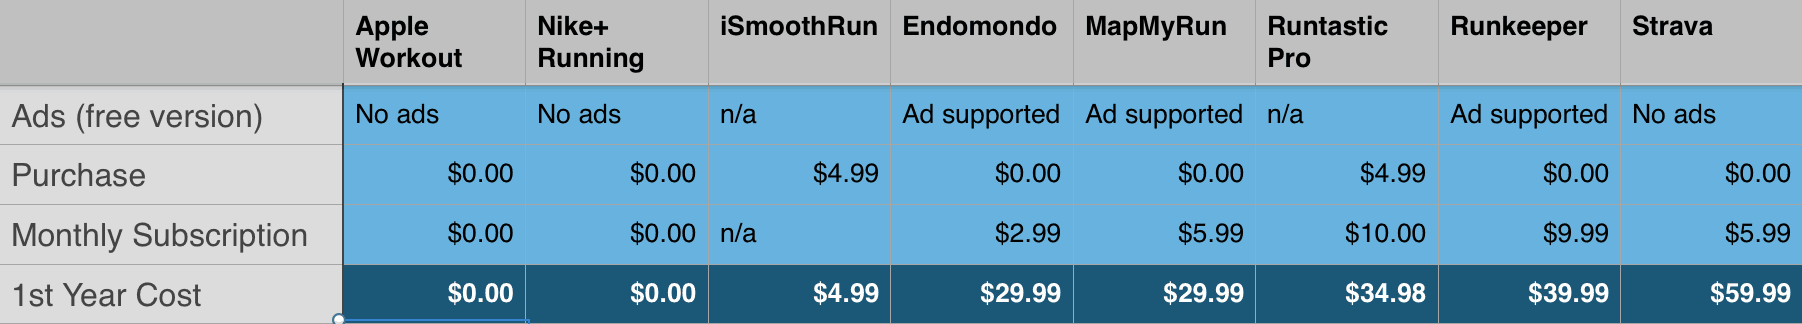 Comparing the price of running apps